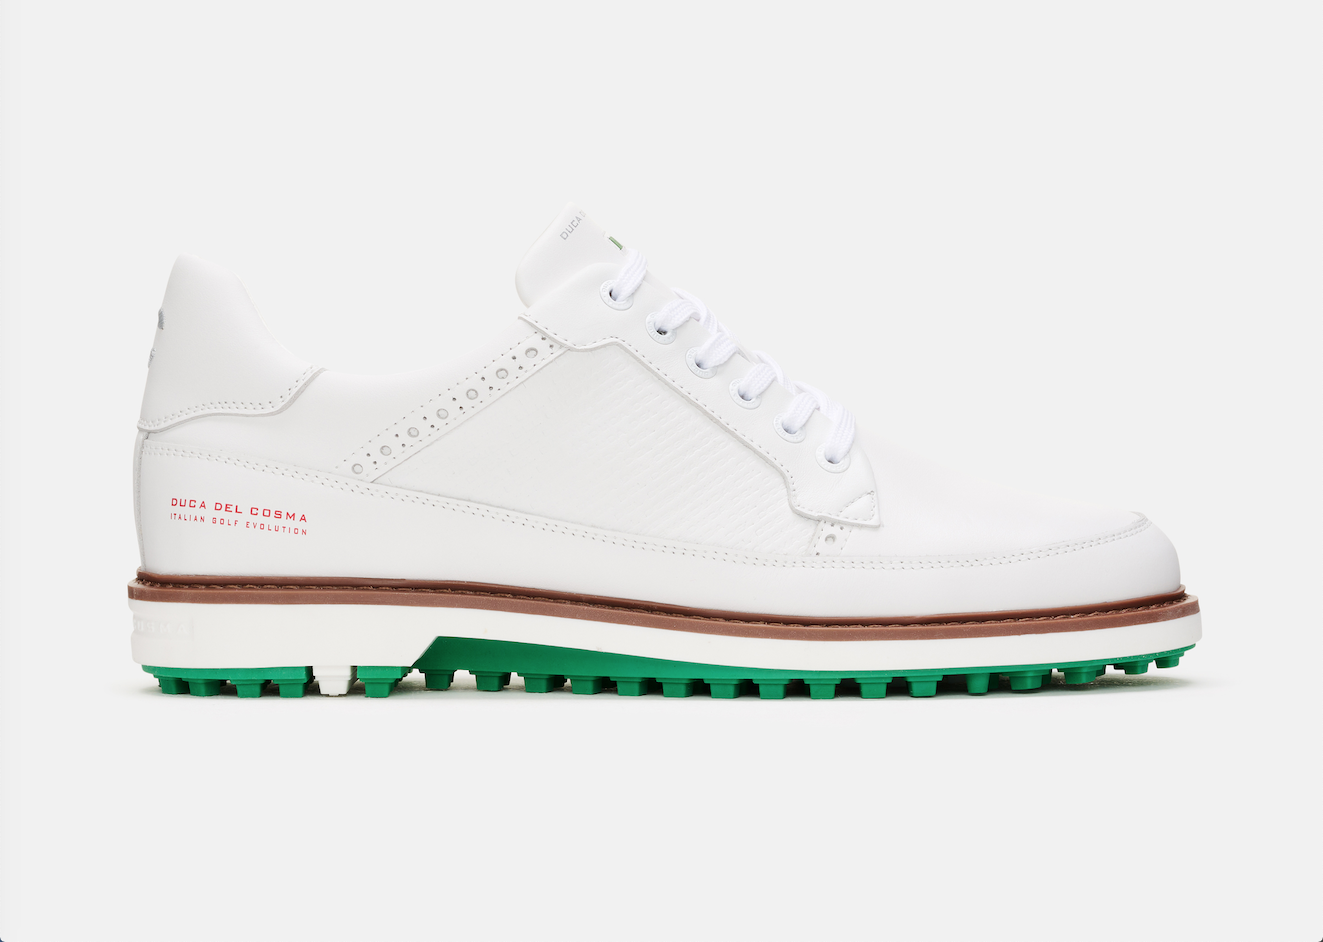 COMPETITION: WIN A PAIR OF DUCA DEL COSMA GOLF SHOES! - Golf News